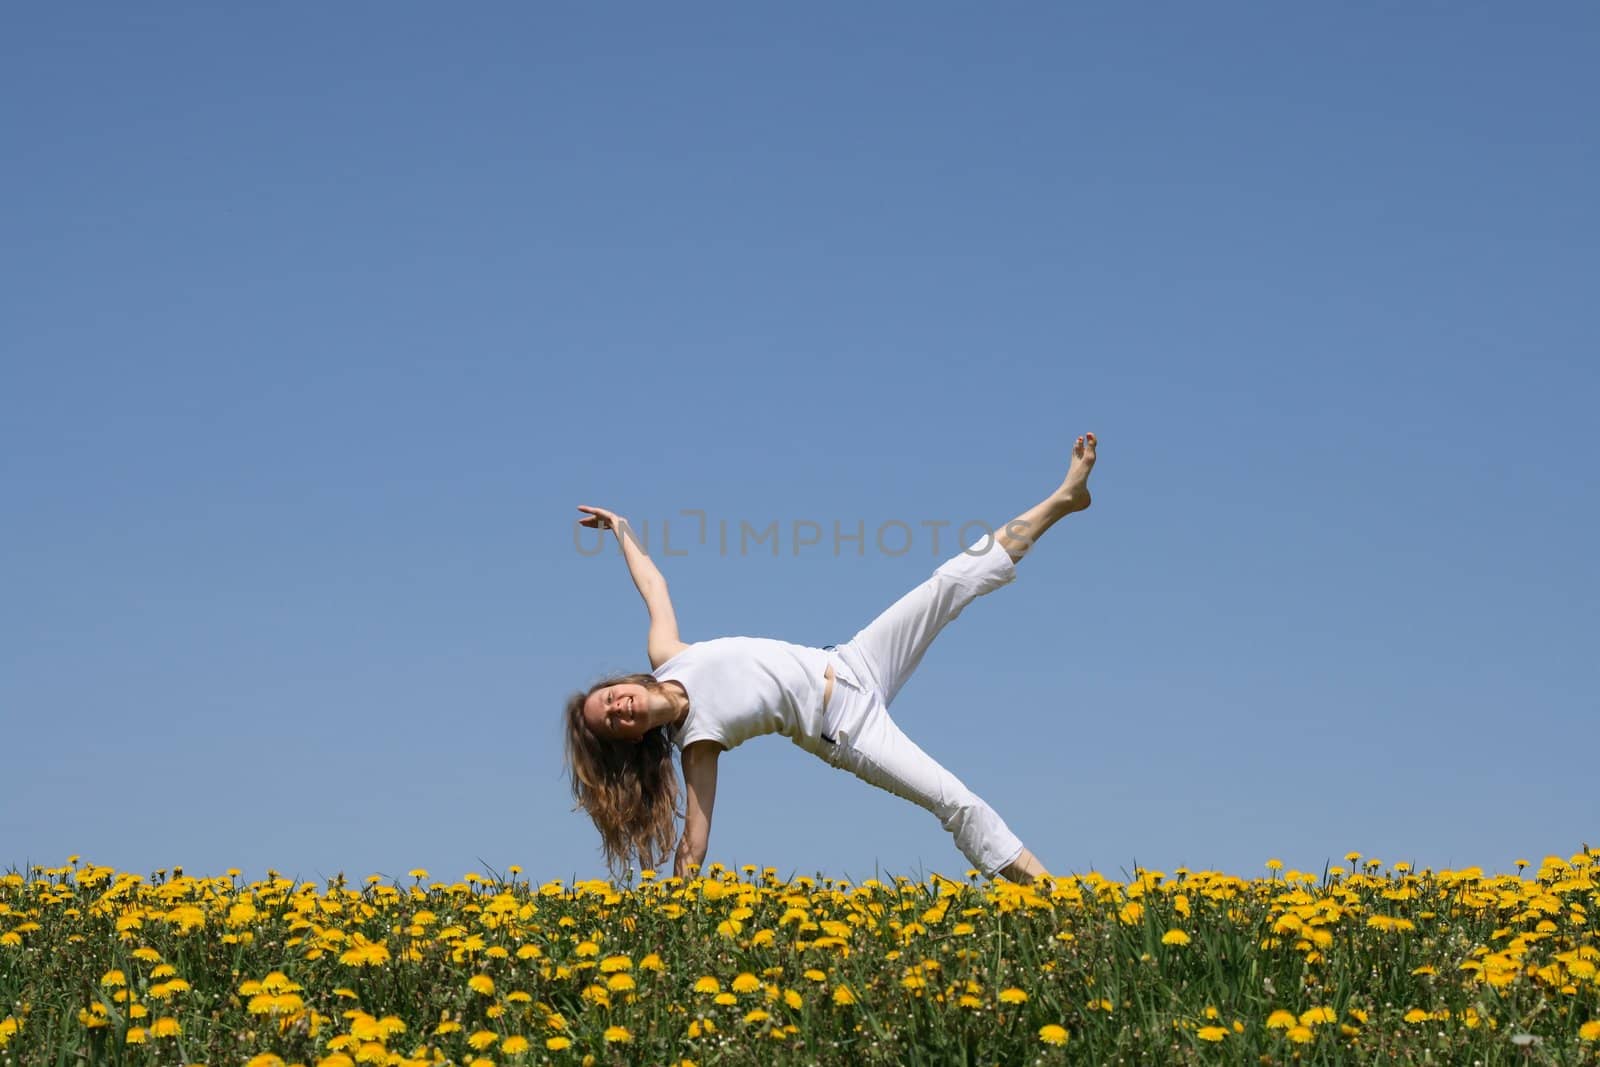 Smiling young woman exercising in dandelion field by anikasalsera